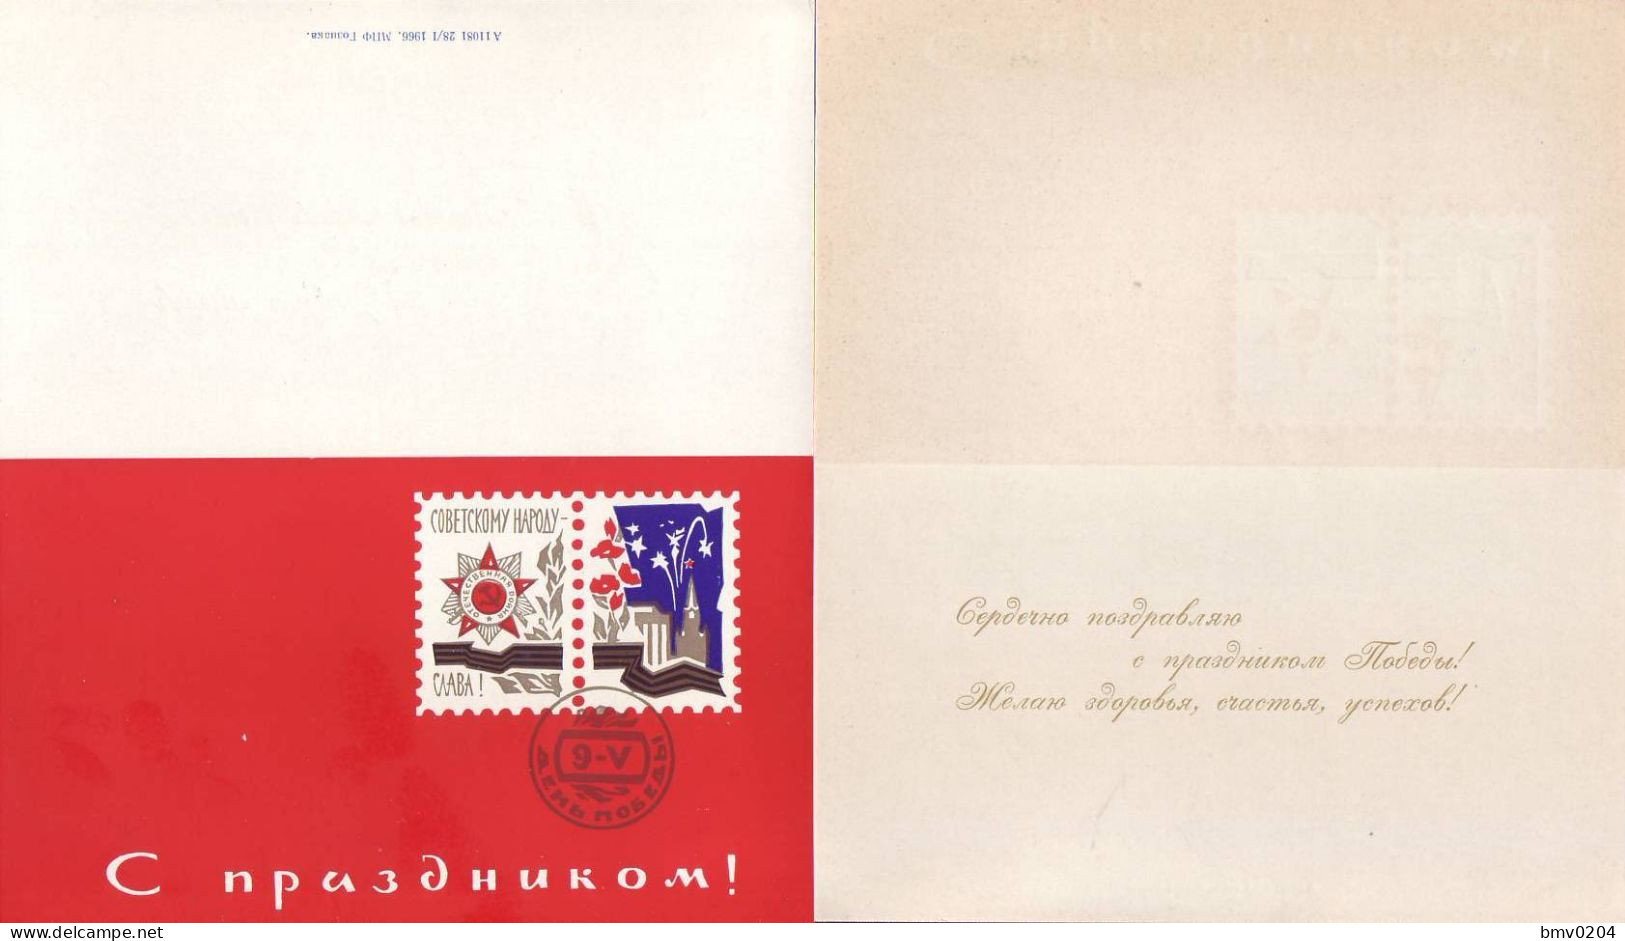 1966 RUSSIA RUSSIE USSR URSS  May 9 - Victory Day! Order, Victory Salute  Souvenir Postcard - Briefe U. Dokumente